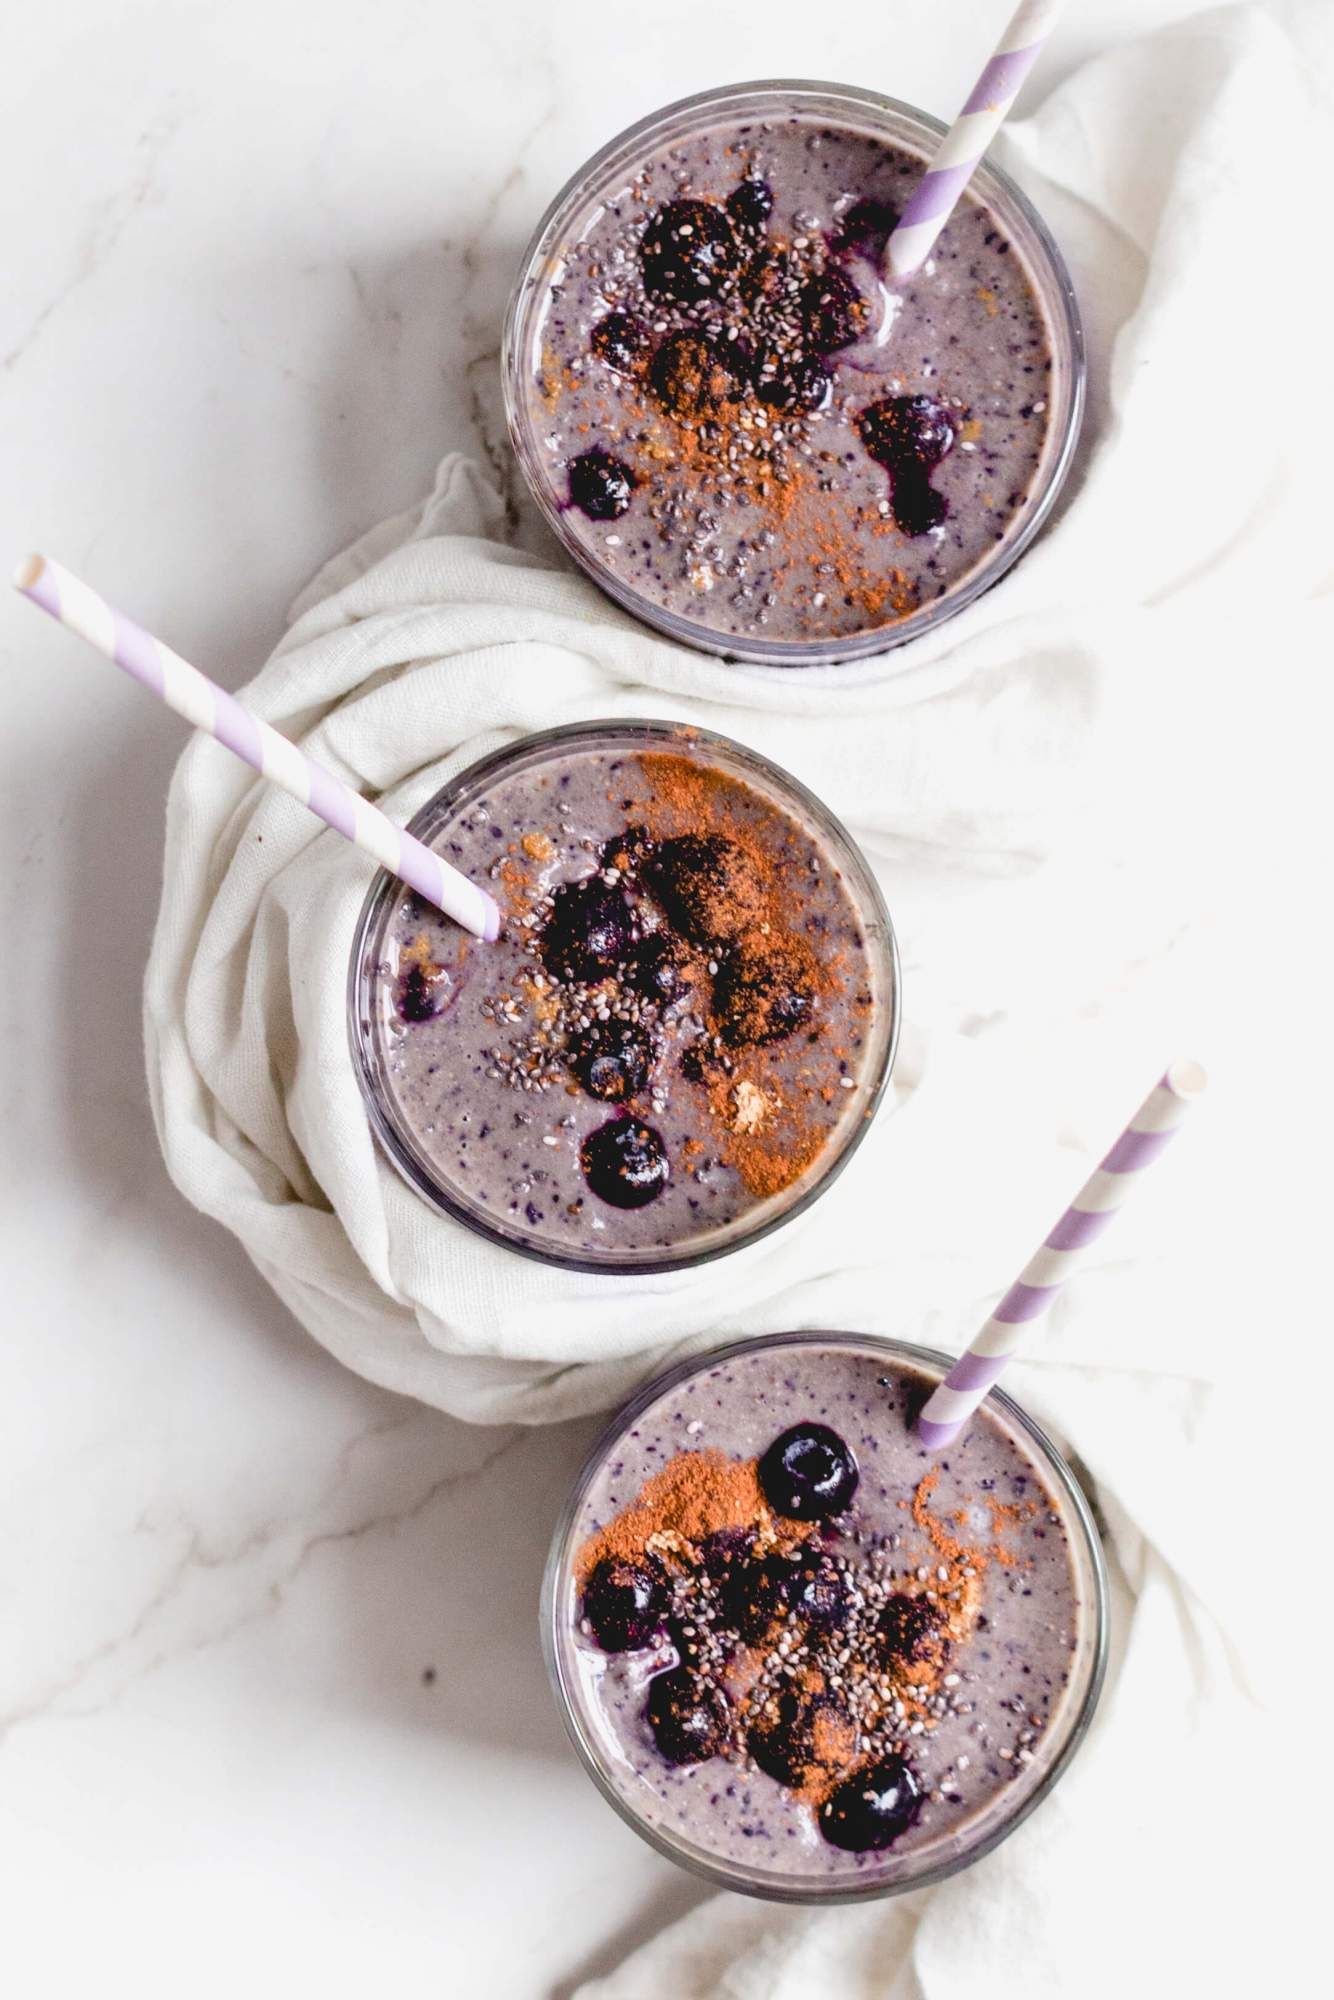 Banana blueberry smoothie in three glasses with fresh blueberries and cinnamon on top.